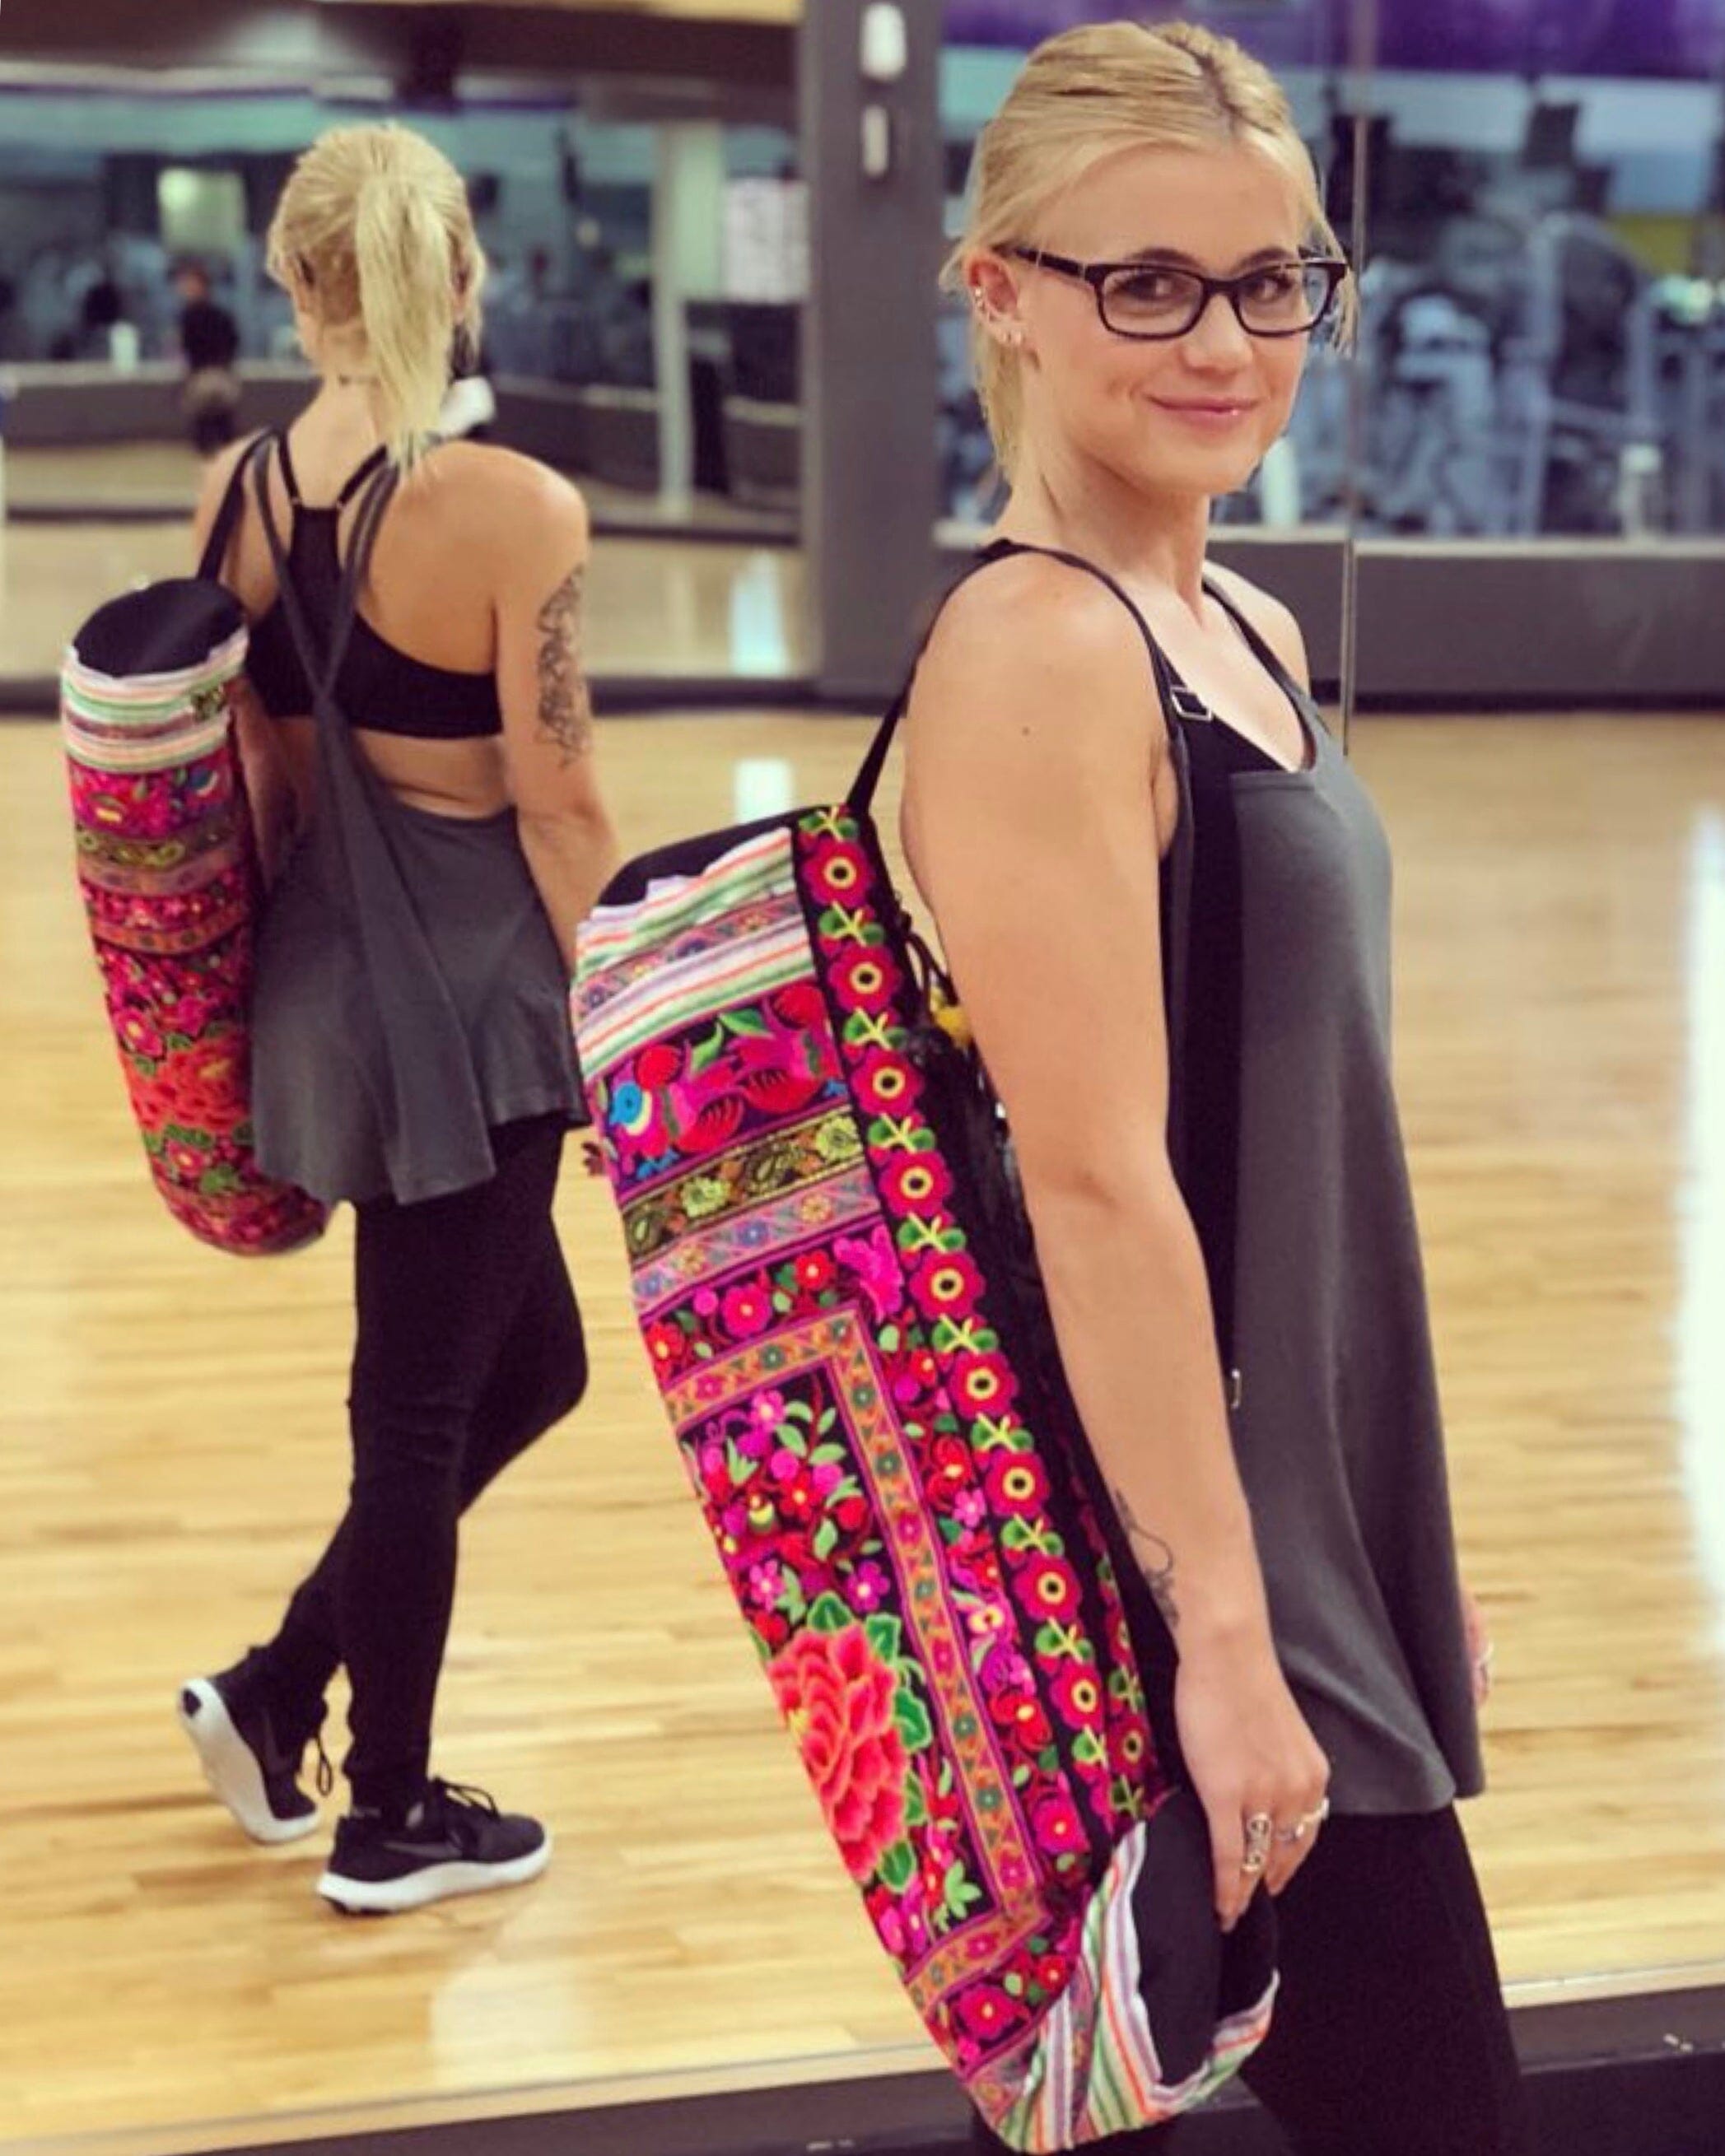 Yushufu Yoga Mat Bags and Carriers Fits All Your One size, style-32